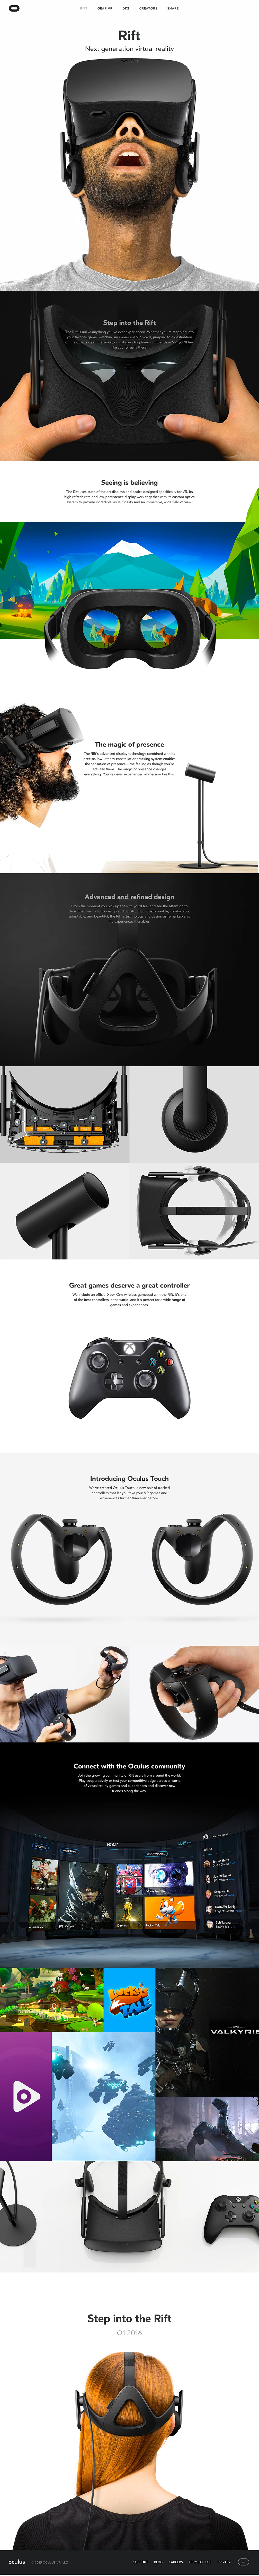 Oculus Rift Landing Page Example: The Oculus Rift is a virtual reality system that completely immerses you inside virtual worlds.